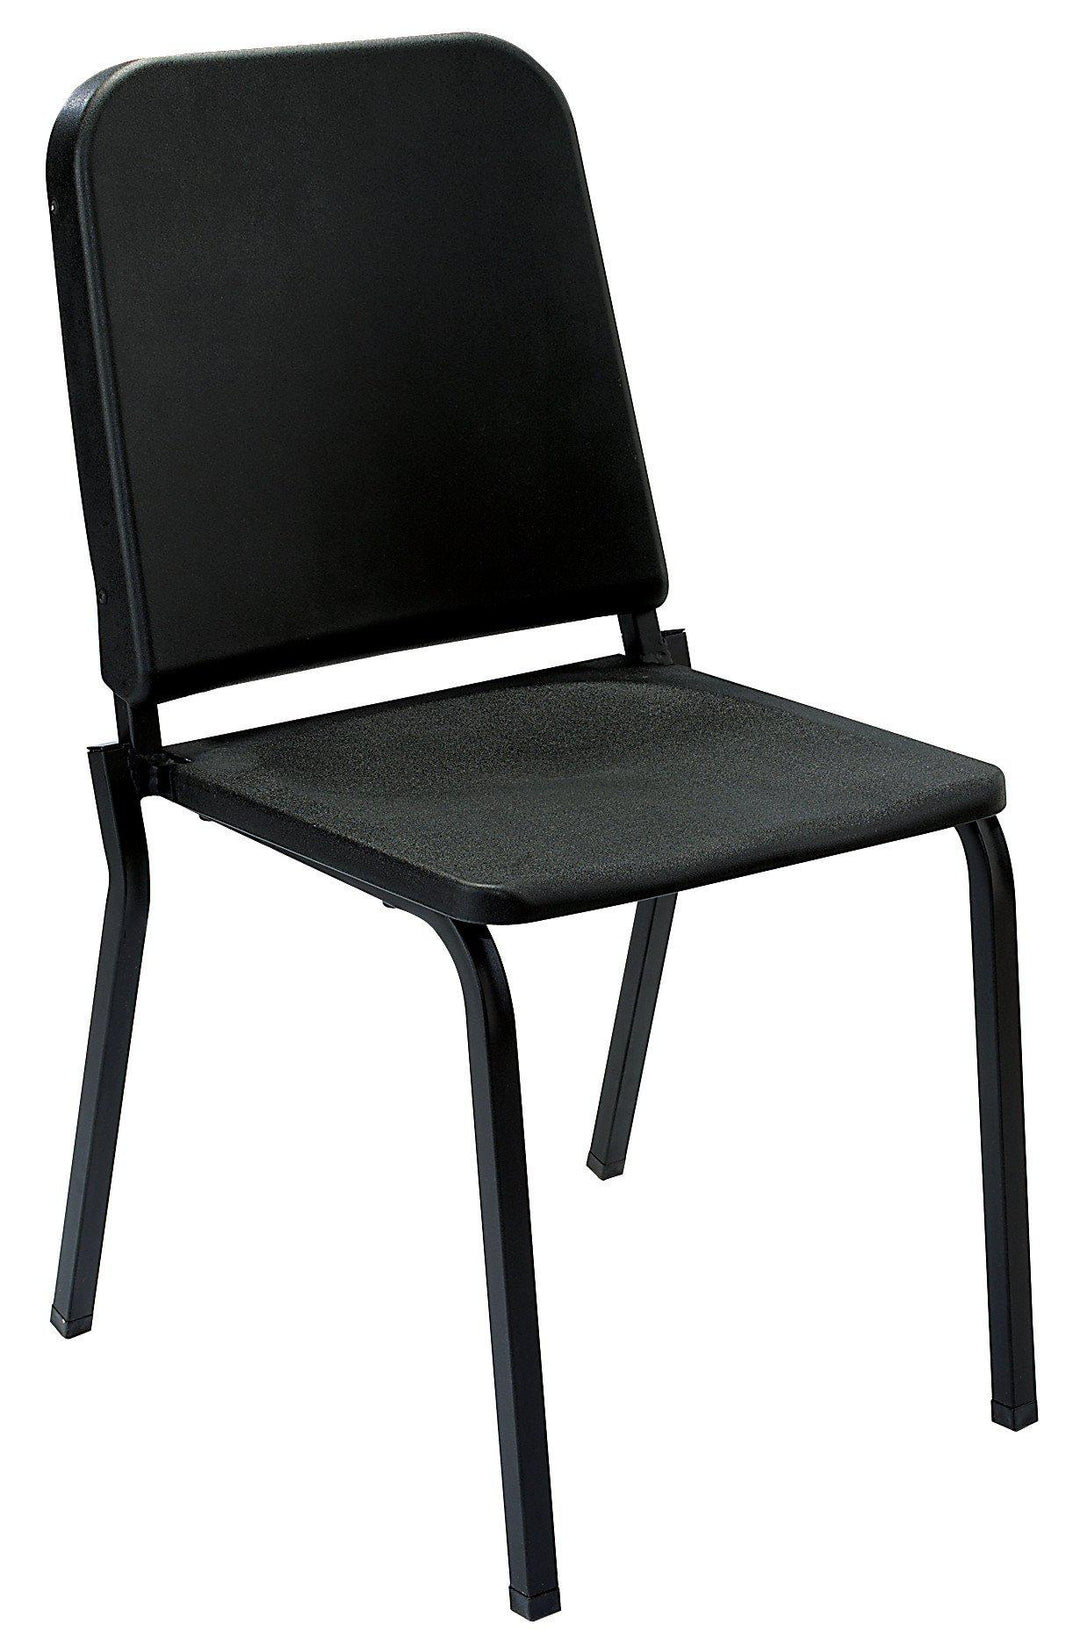 Banquet Chair Model 8210 Series Melody